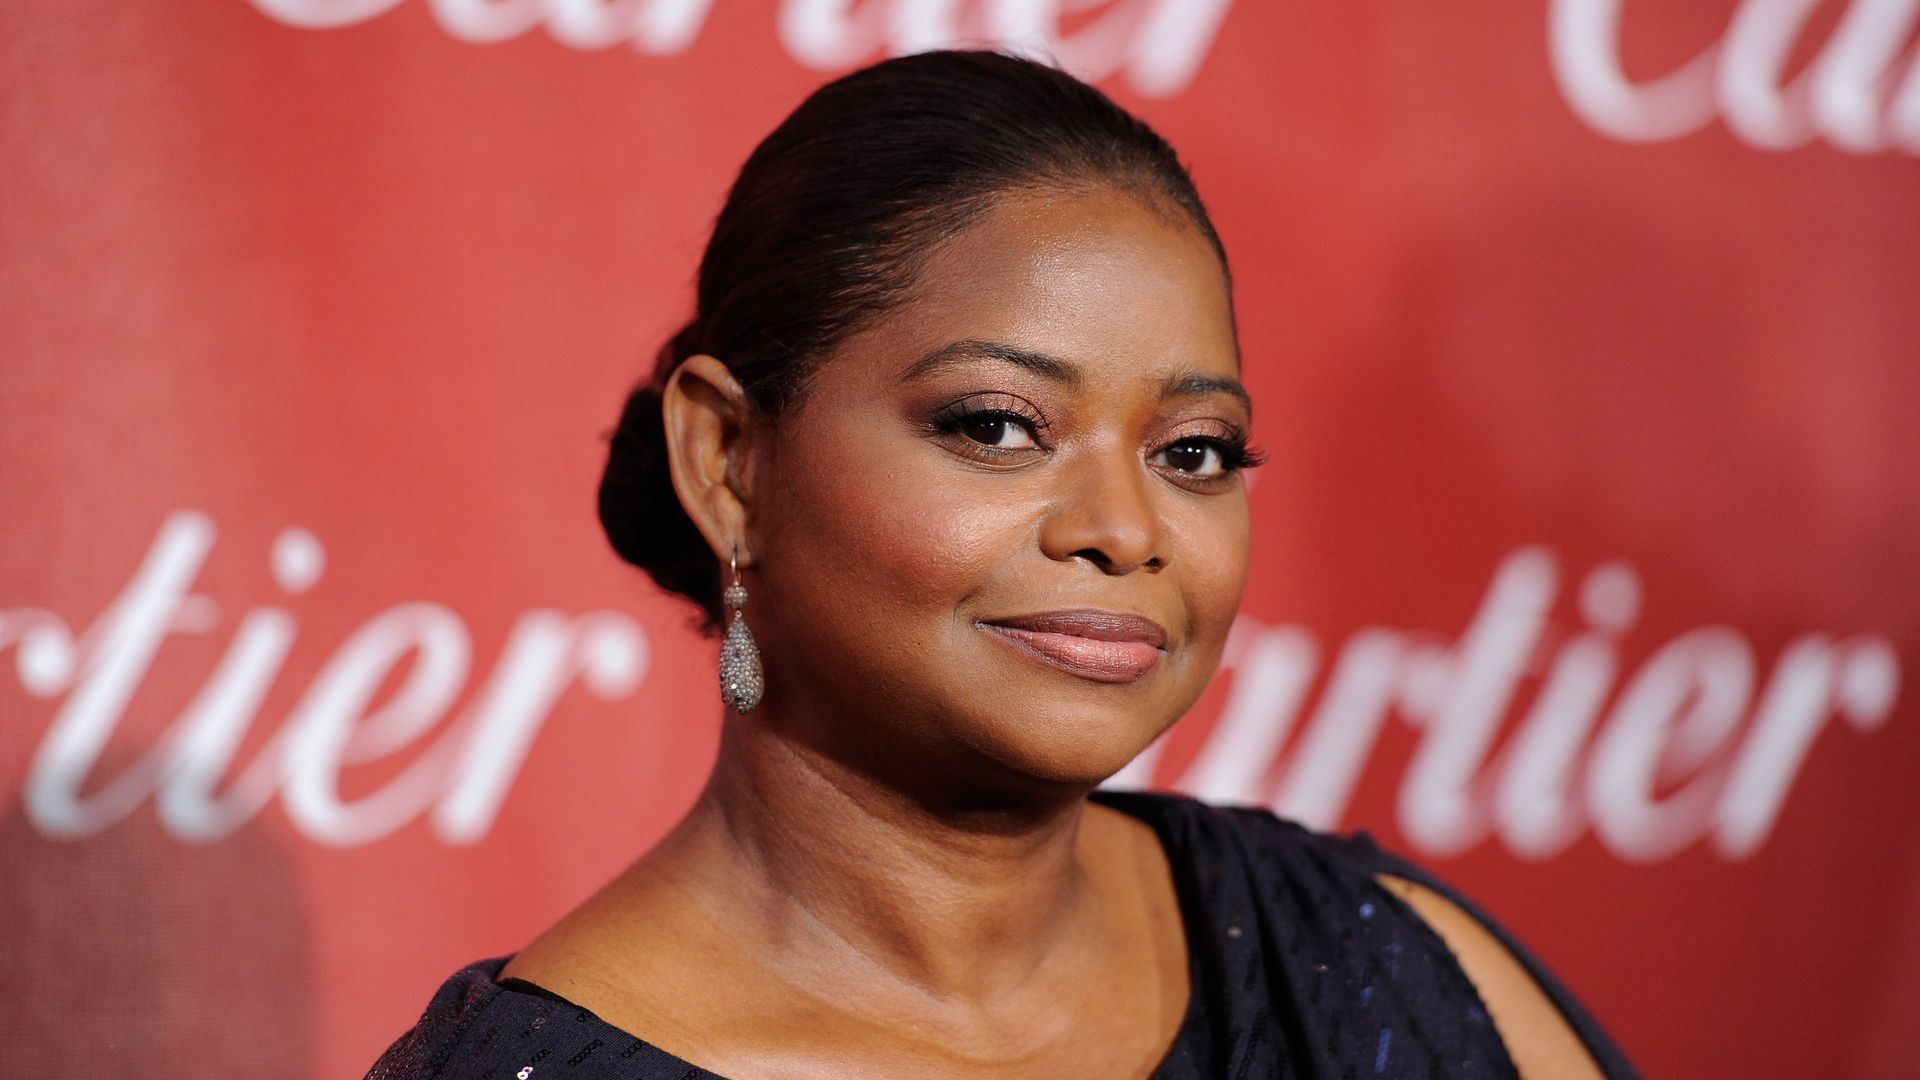 Actress Octavia Spencer arrives at the 2012 Palm Springs International Film Festival Awards Gala at Palm Springs Convention Center on January 7, 2012 in Palm Springs, California.